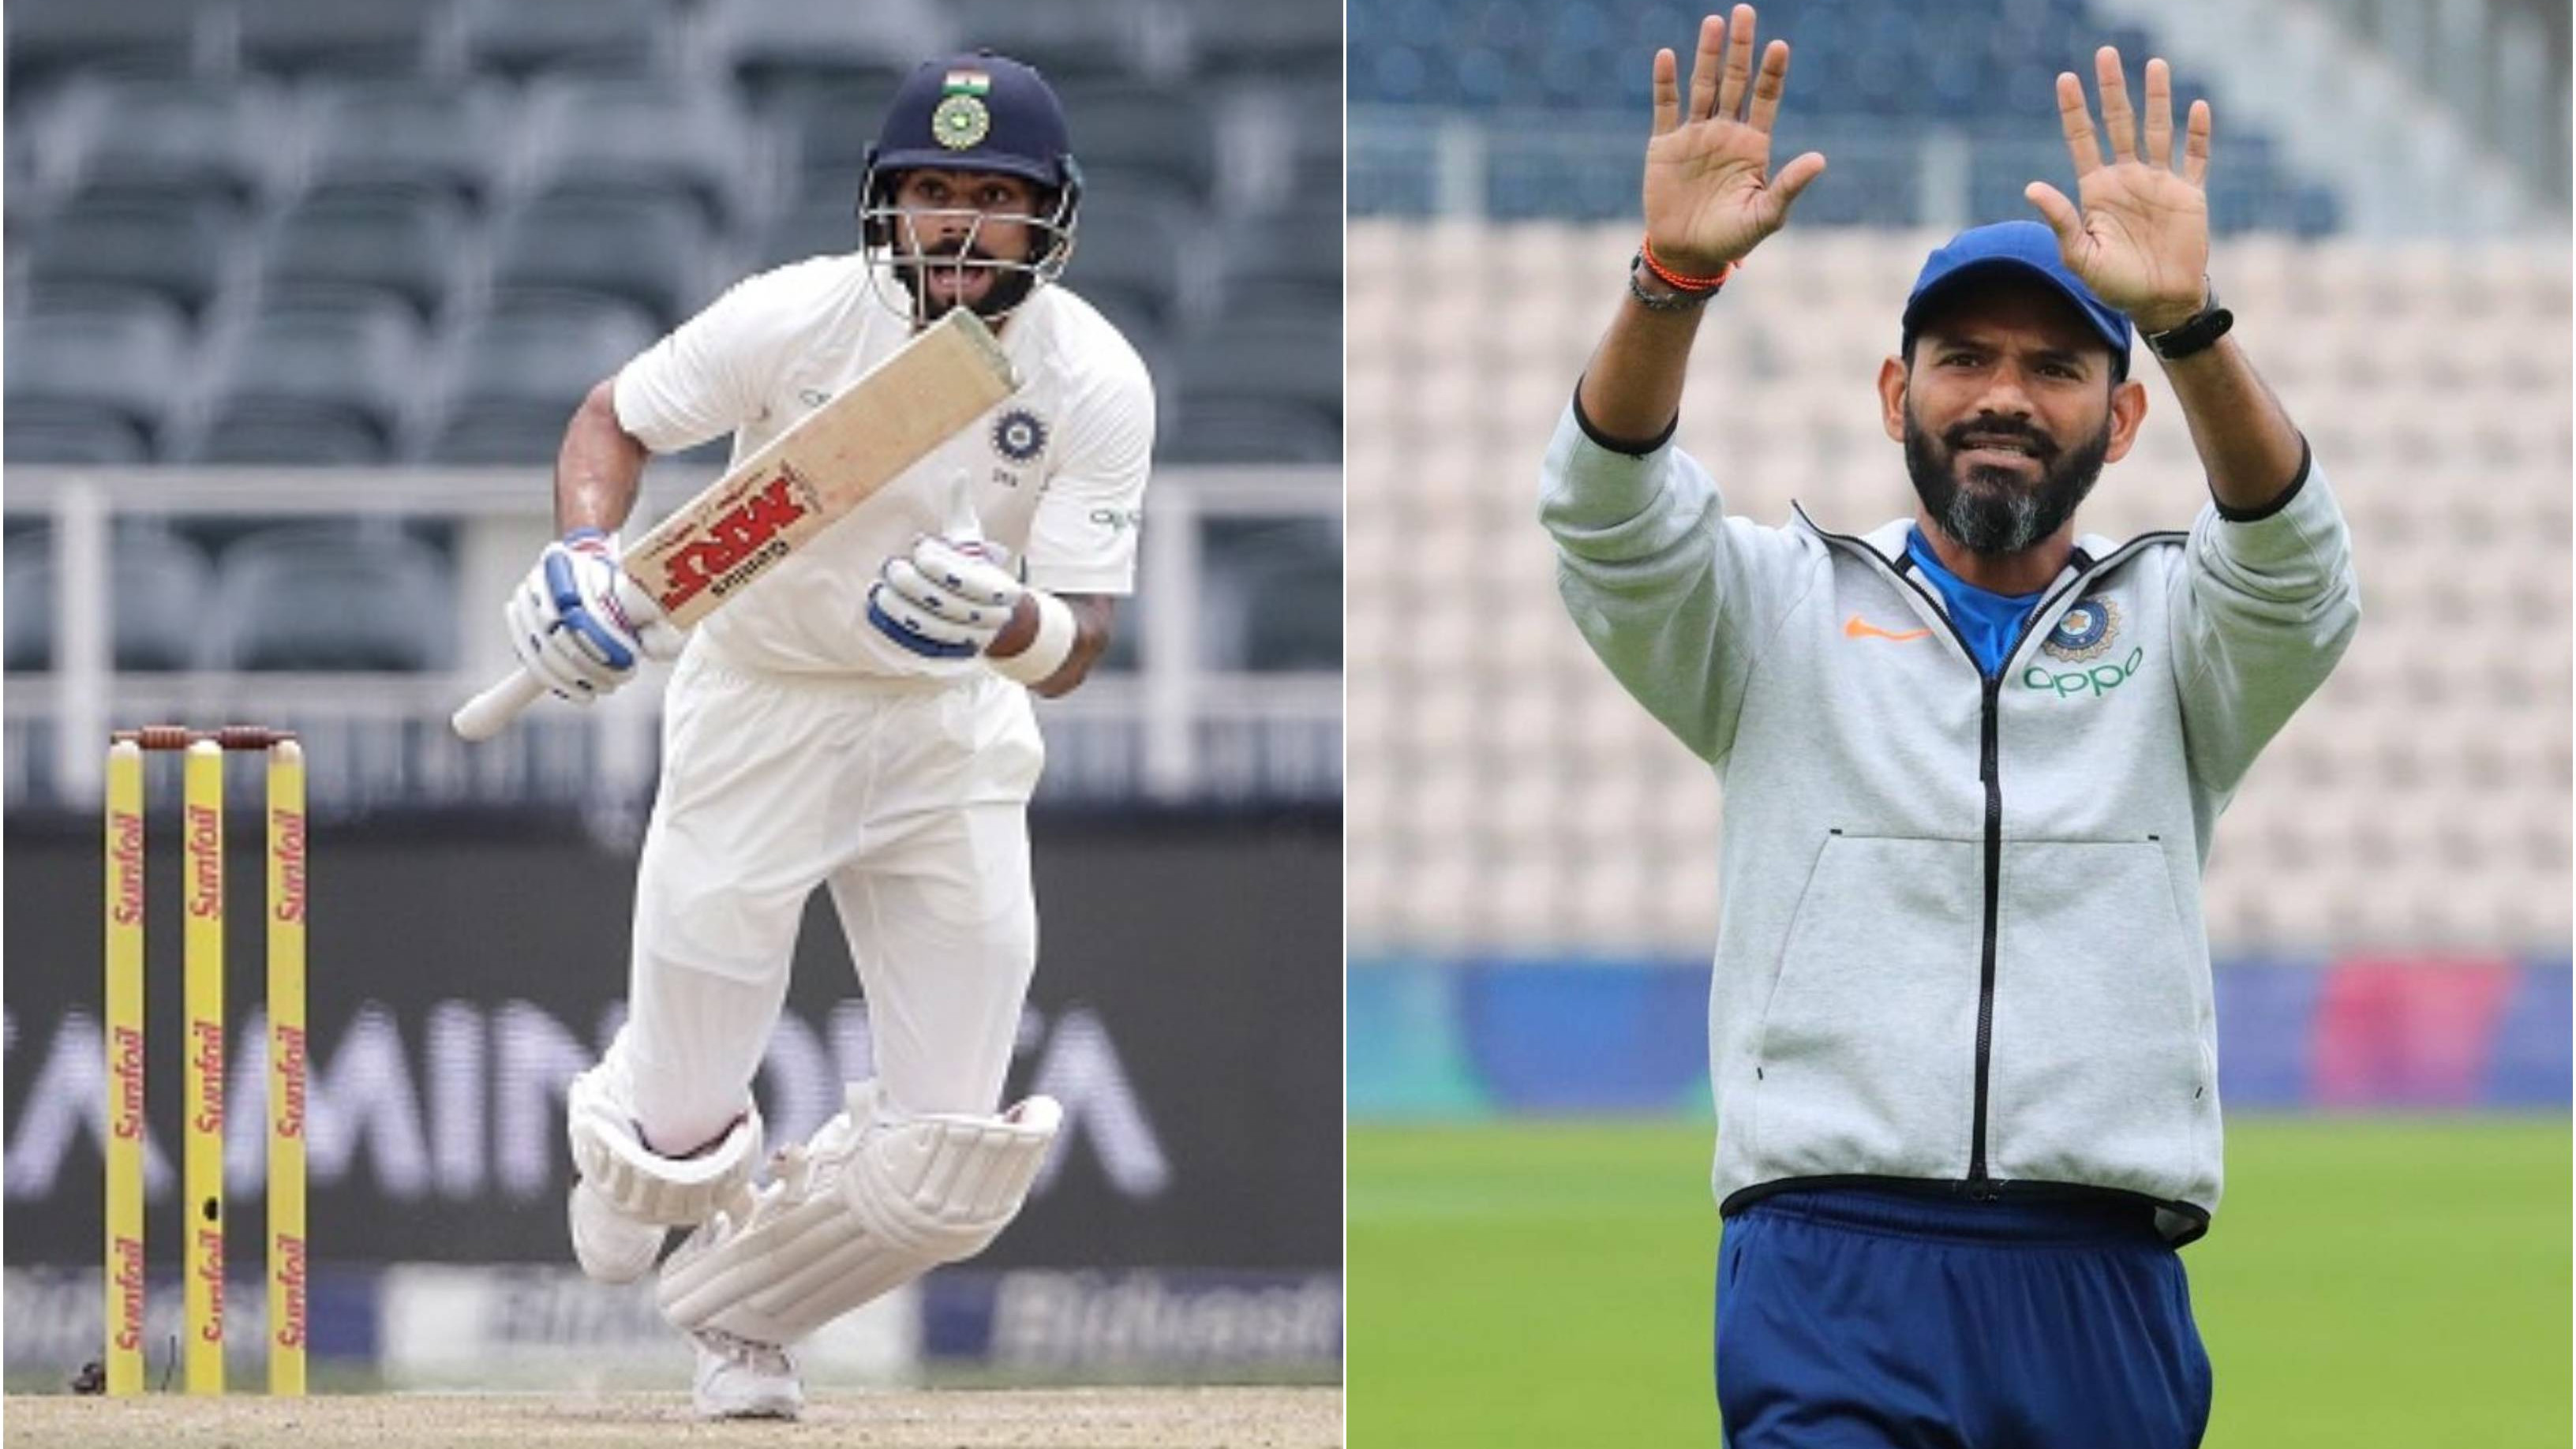 “We tried to dissuade him, but he was adamant”: Sridhar recalls Kohli wanting to bat on dangerous wicket in South Africa